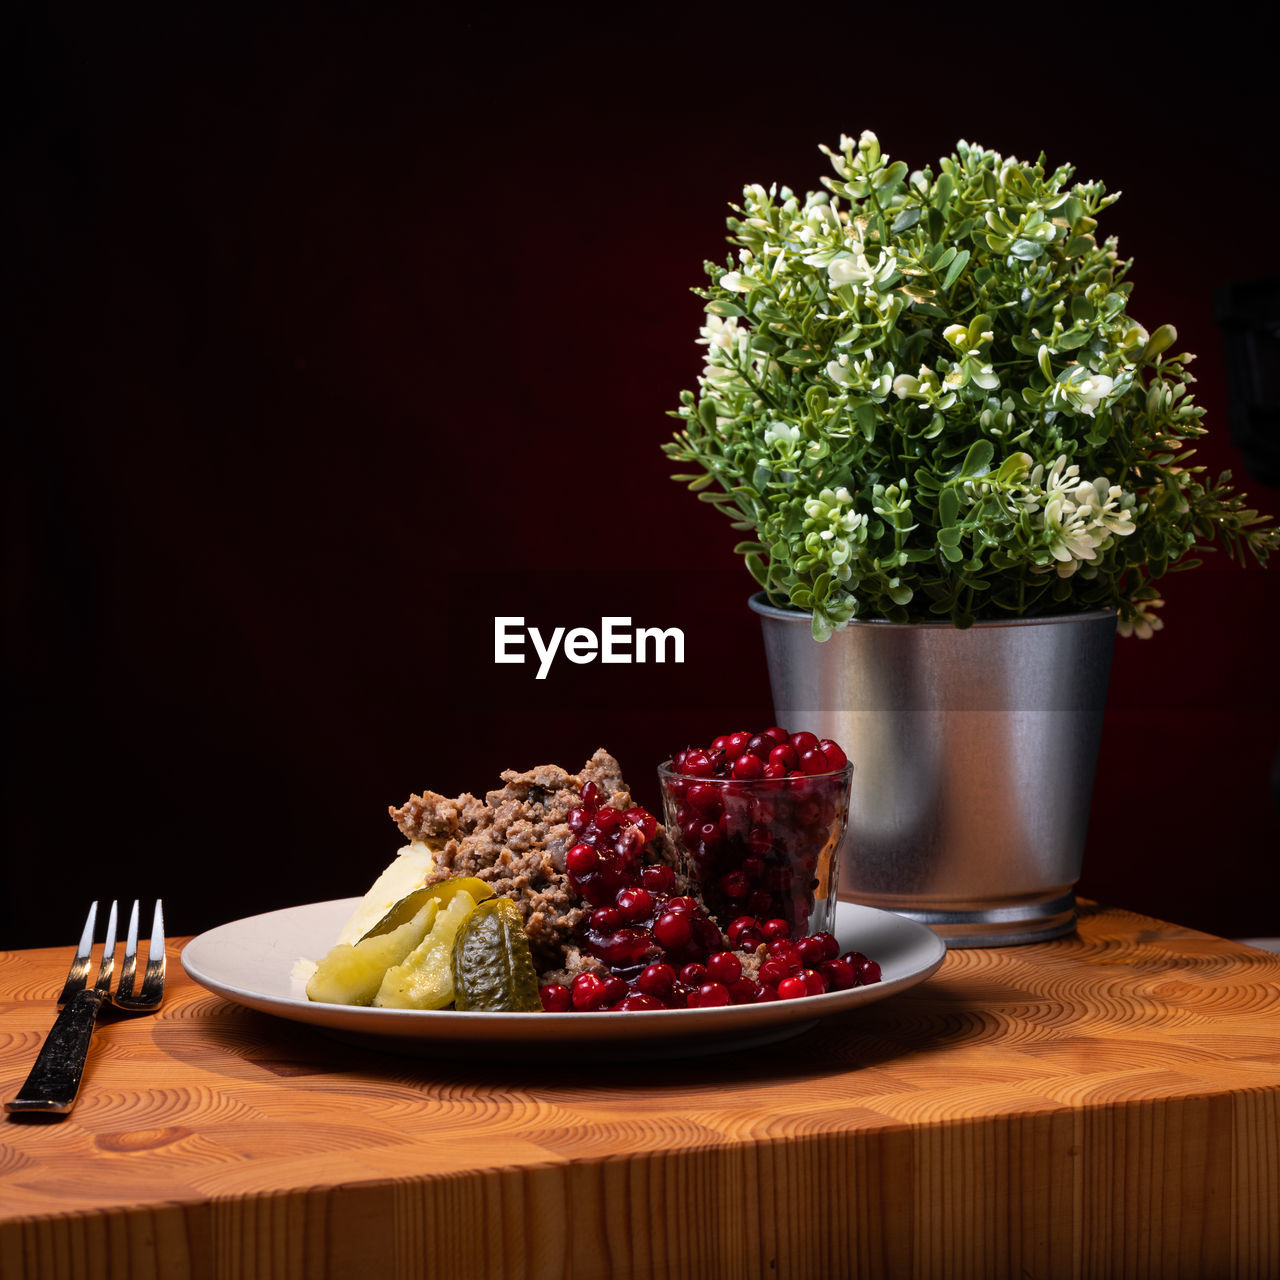 Traditional finnish cuisines. sautéed reindeer on a plate with lingoberry jam and picles on the side